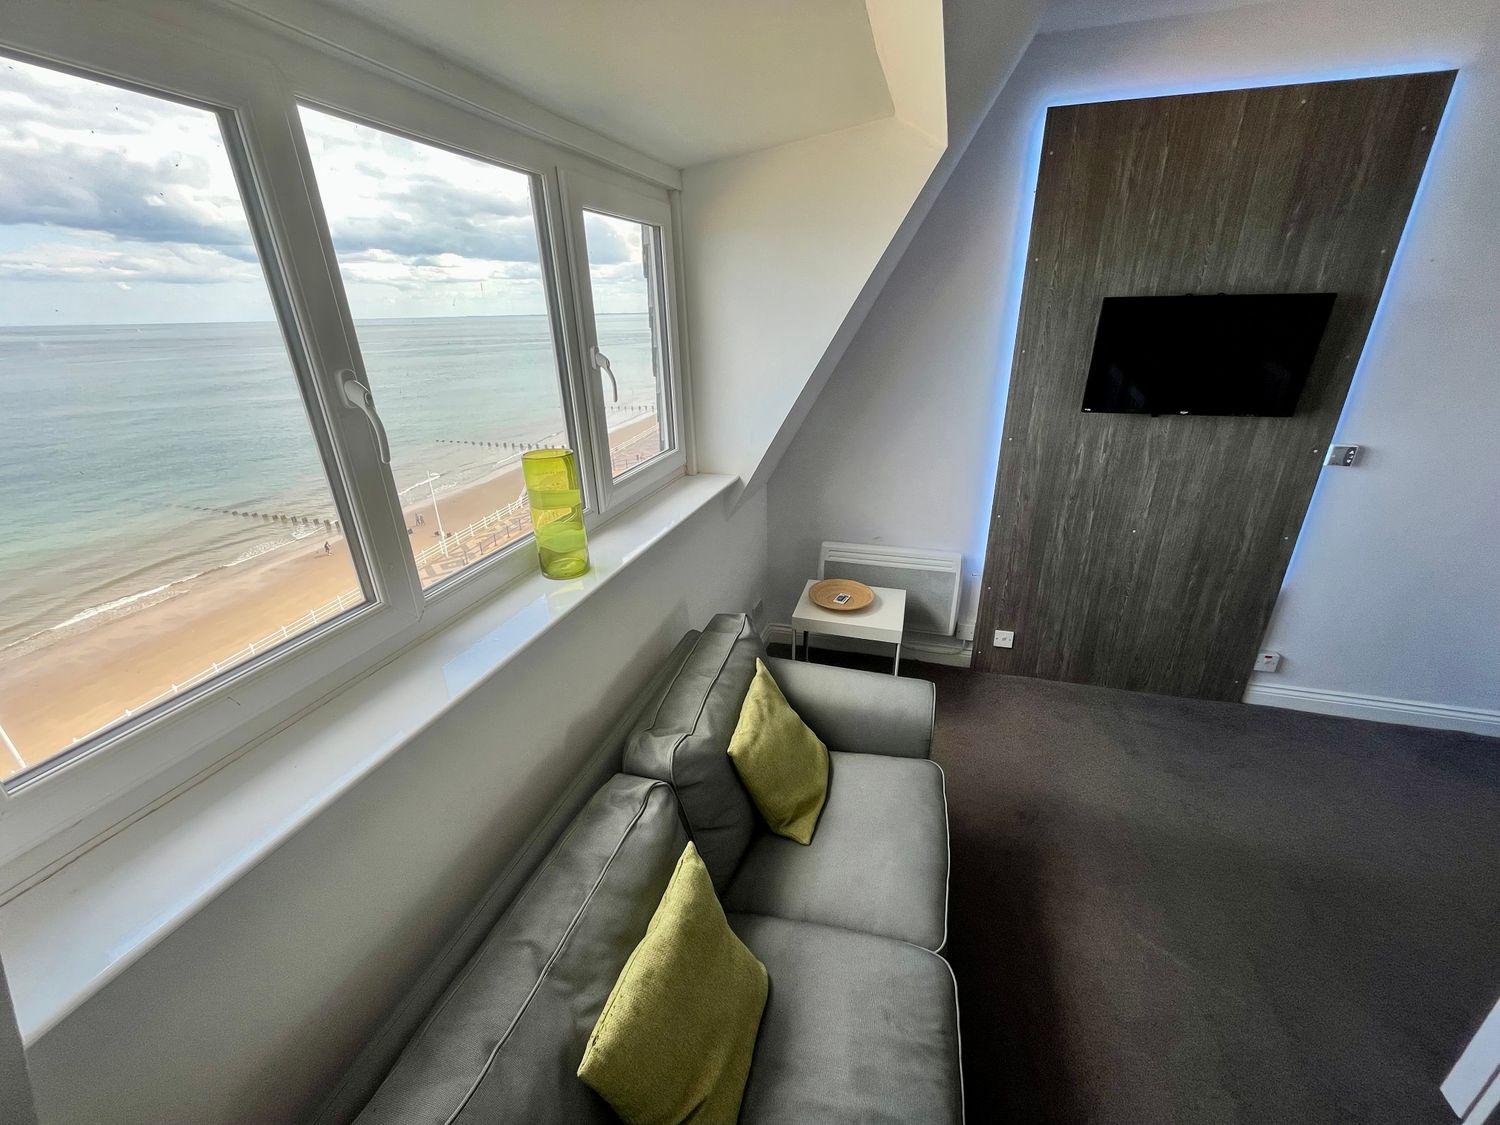 10 Beach View @ Beaconsfield House - North Yorkshire (incl. Whitby) - 1136906 - photo 1